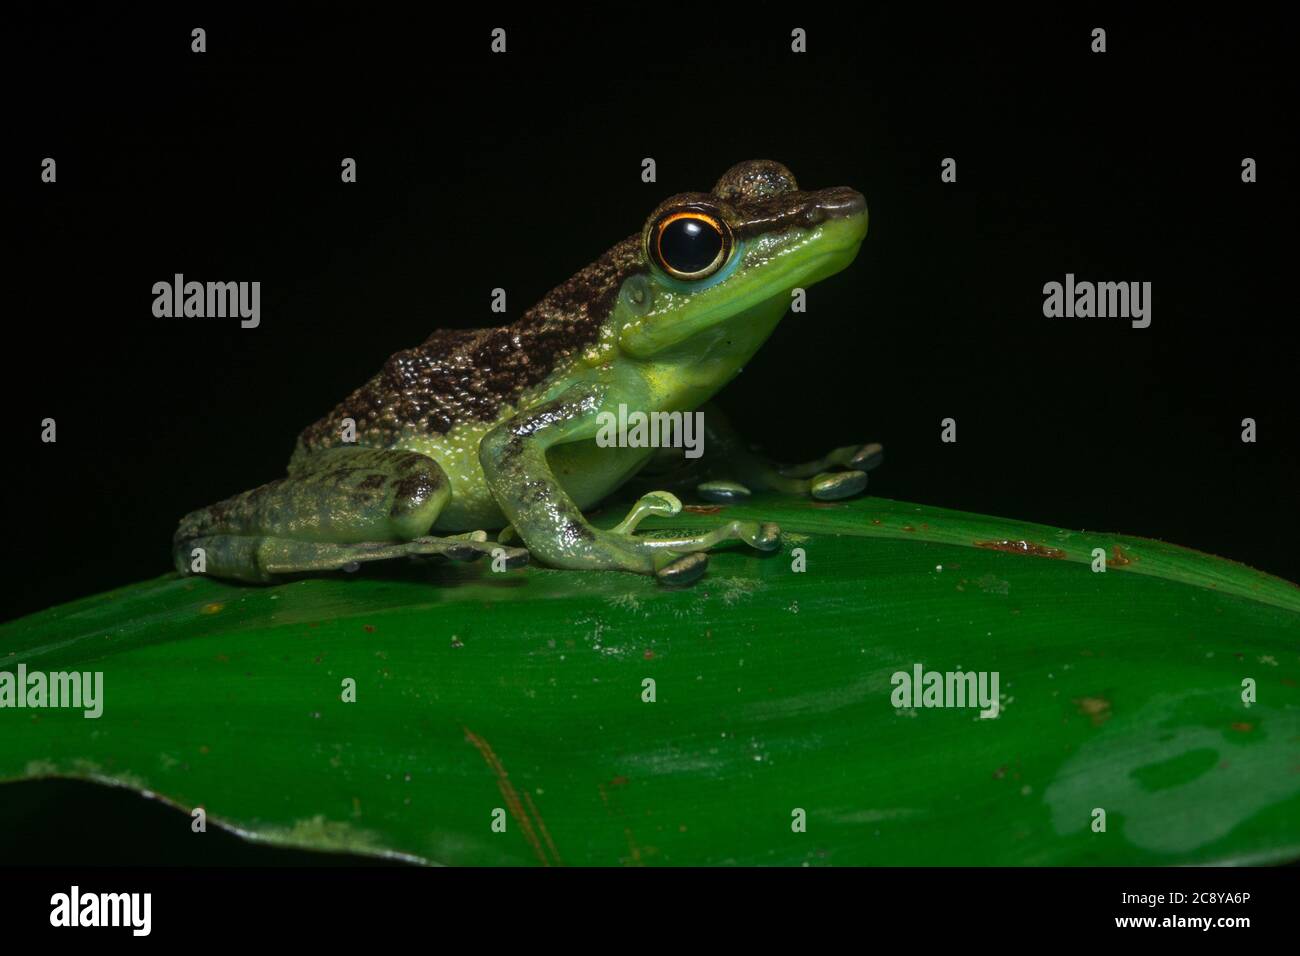 The black spotted rock frog (Staurois guttatus) from the island of Borneo, seen in Danum Valley Conservation area. Stock Photo